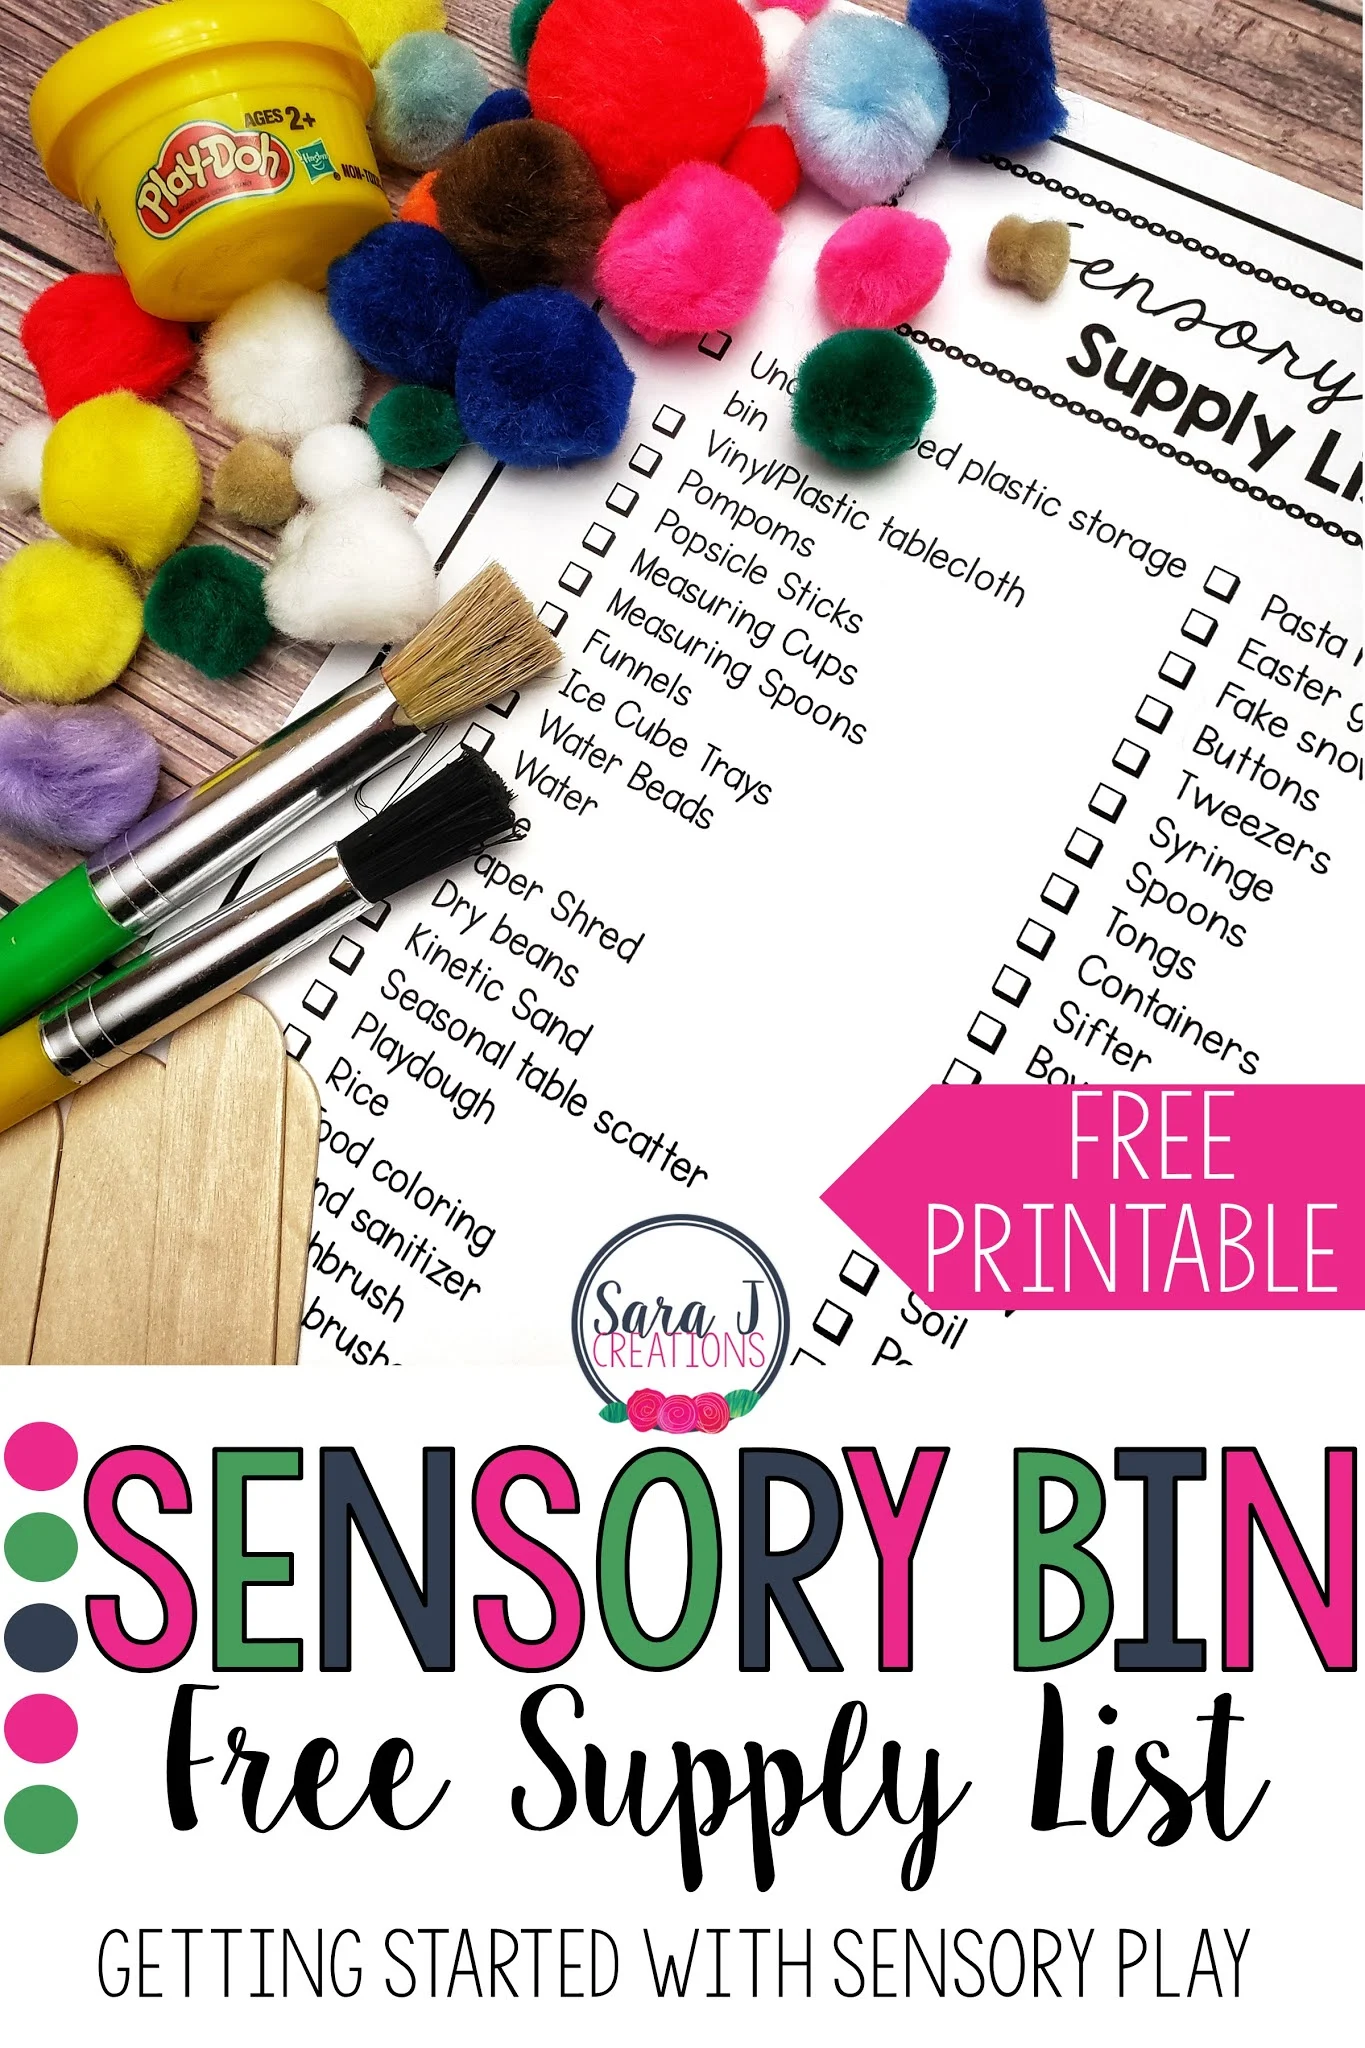 Free supply list to help you get started with sensory bins for your babies, toddlers or preschoolers.